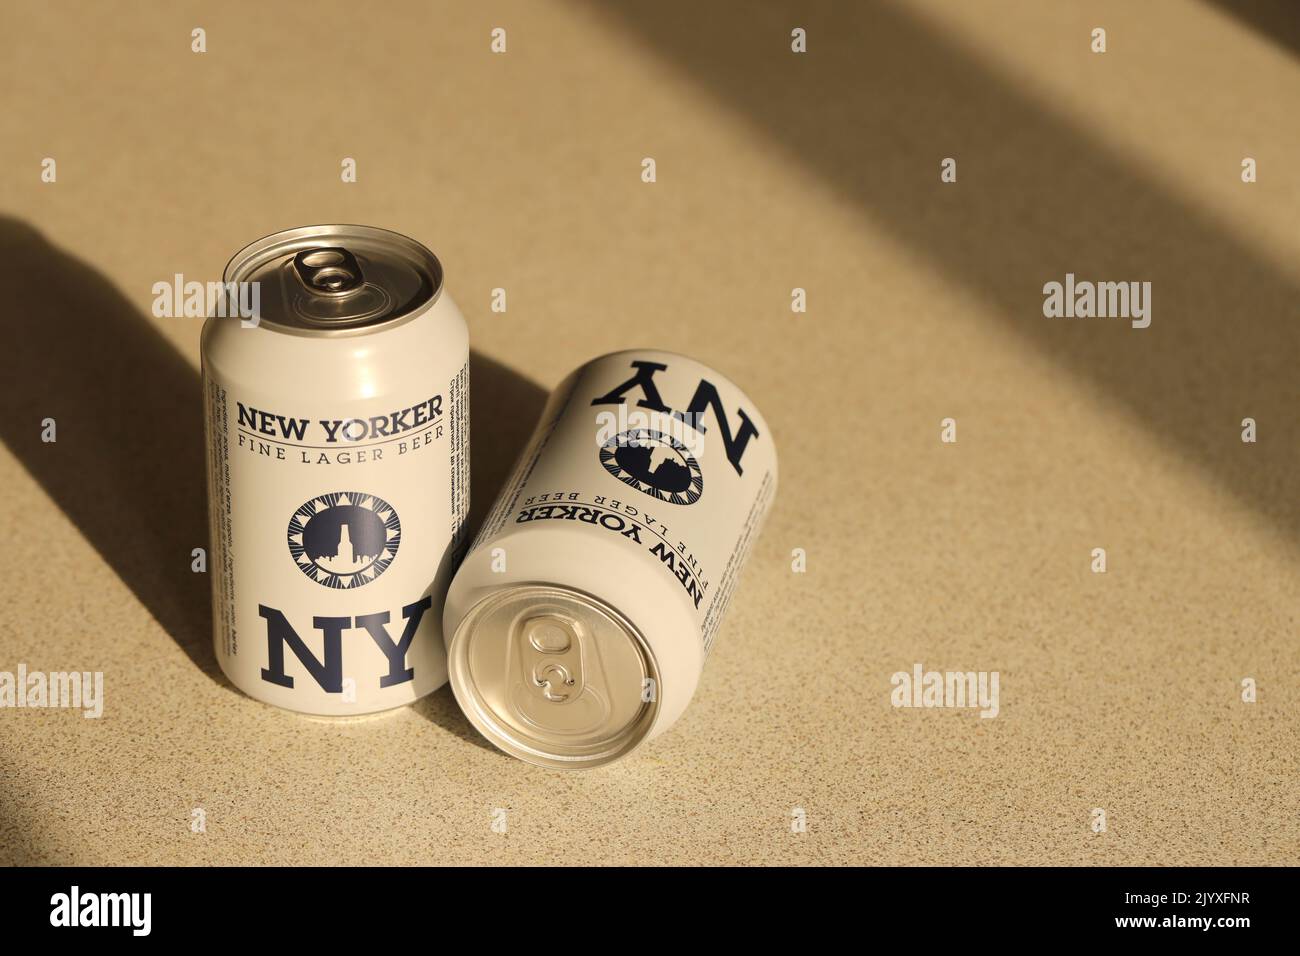 TERNOPIL, UKRAINE - JULY 18, 2022 Two cans of New Yorker fine lager beer with original logo and design on brown retro background surface Stock Photo